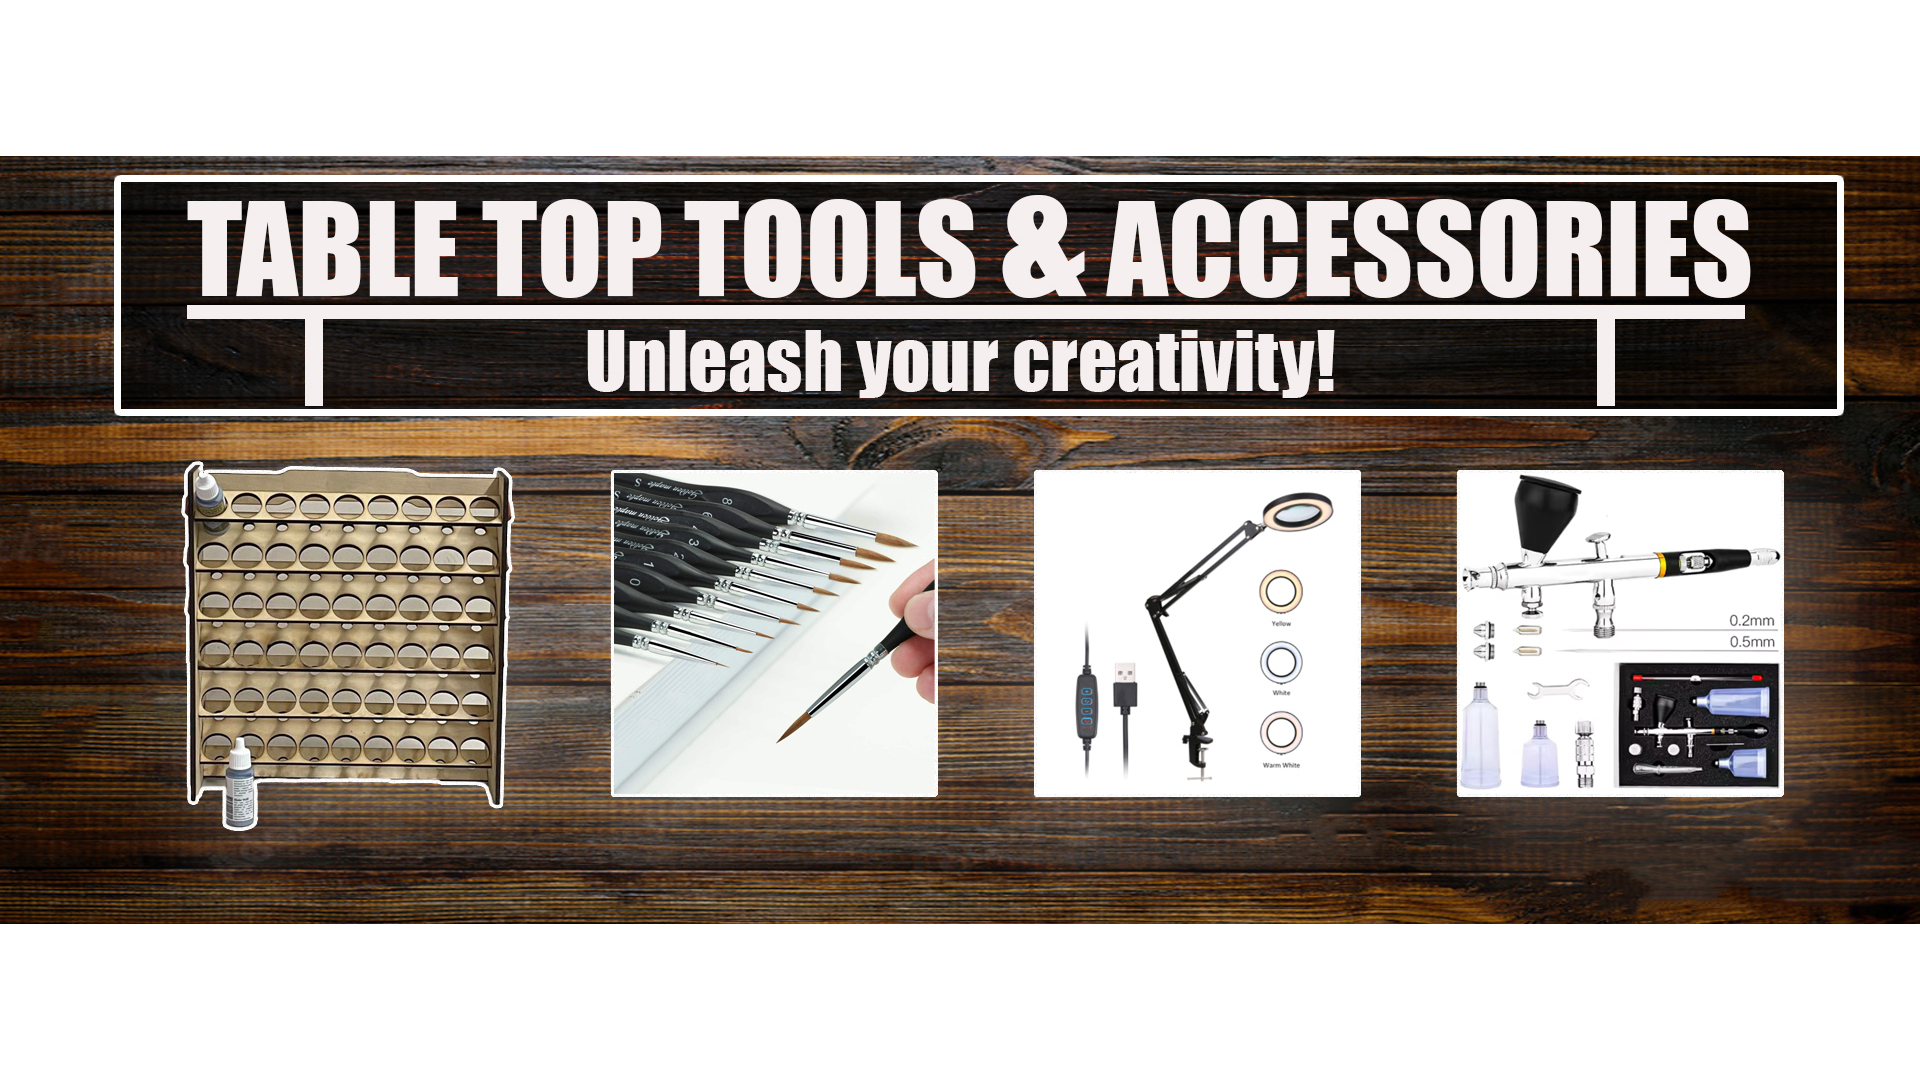 Table top tools and accessories